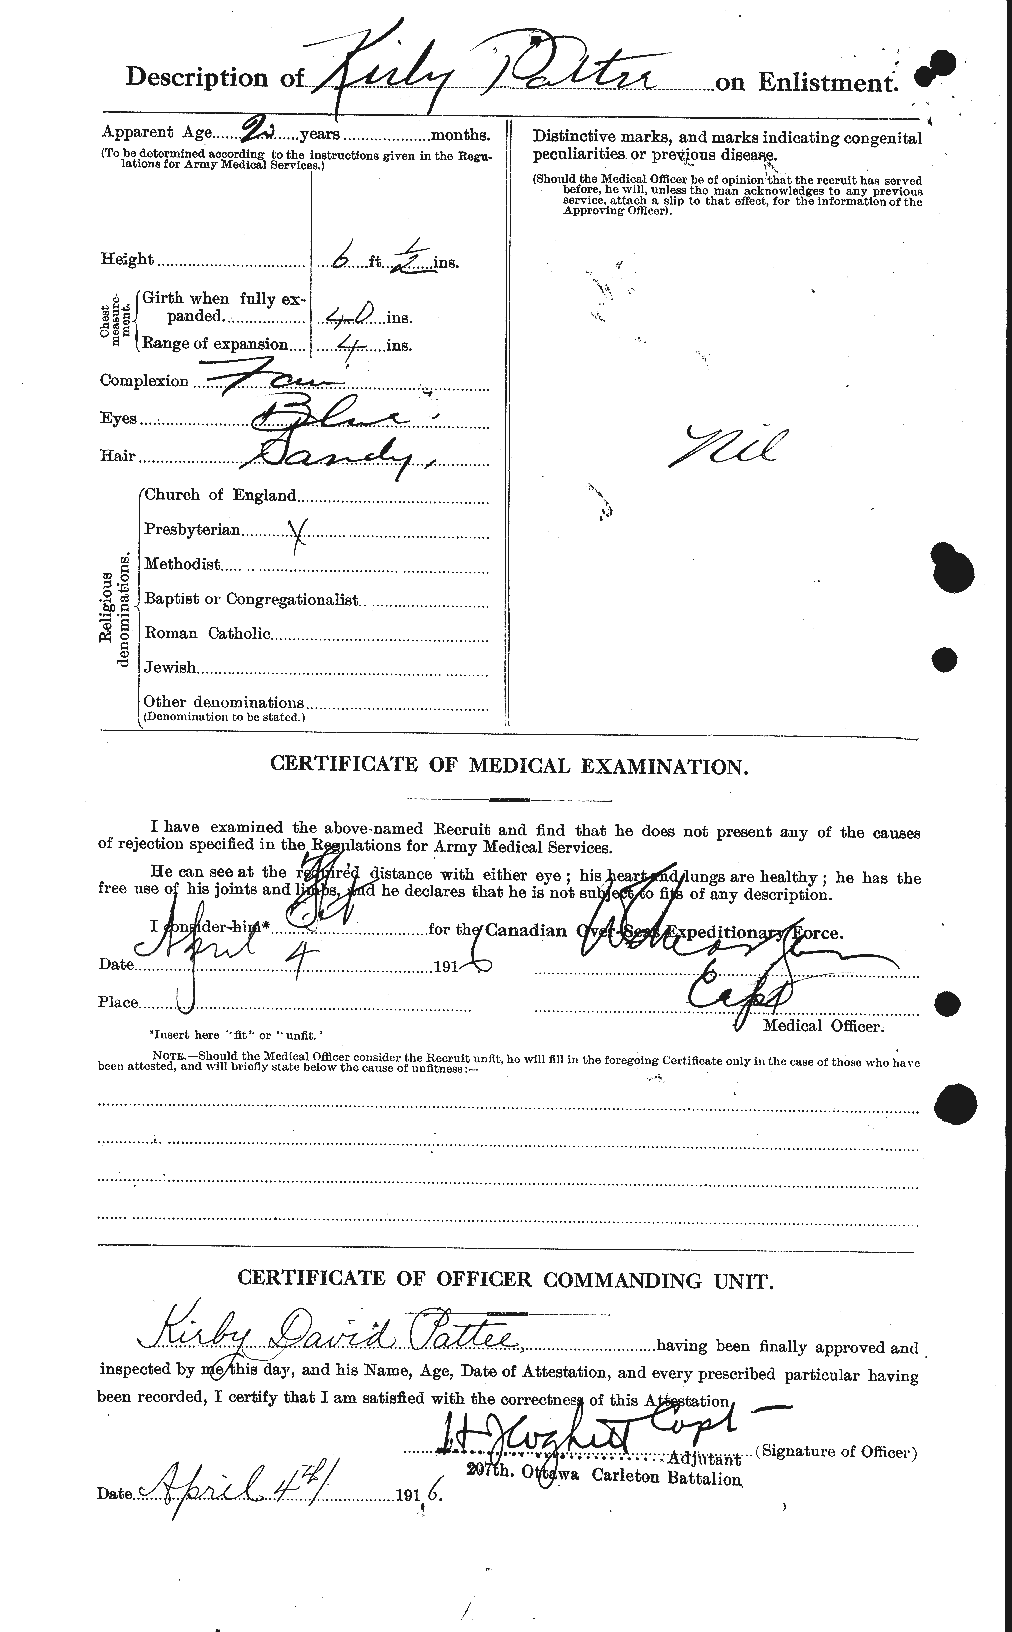 Personnel Records of the First World War - CEF 437173b